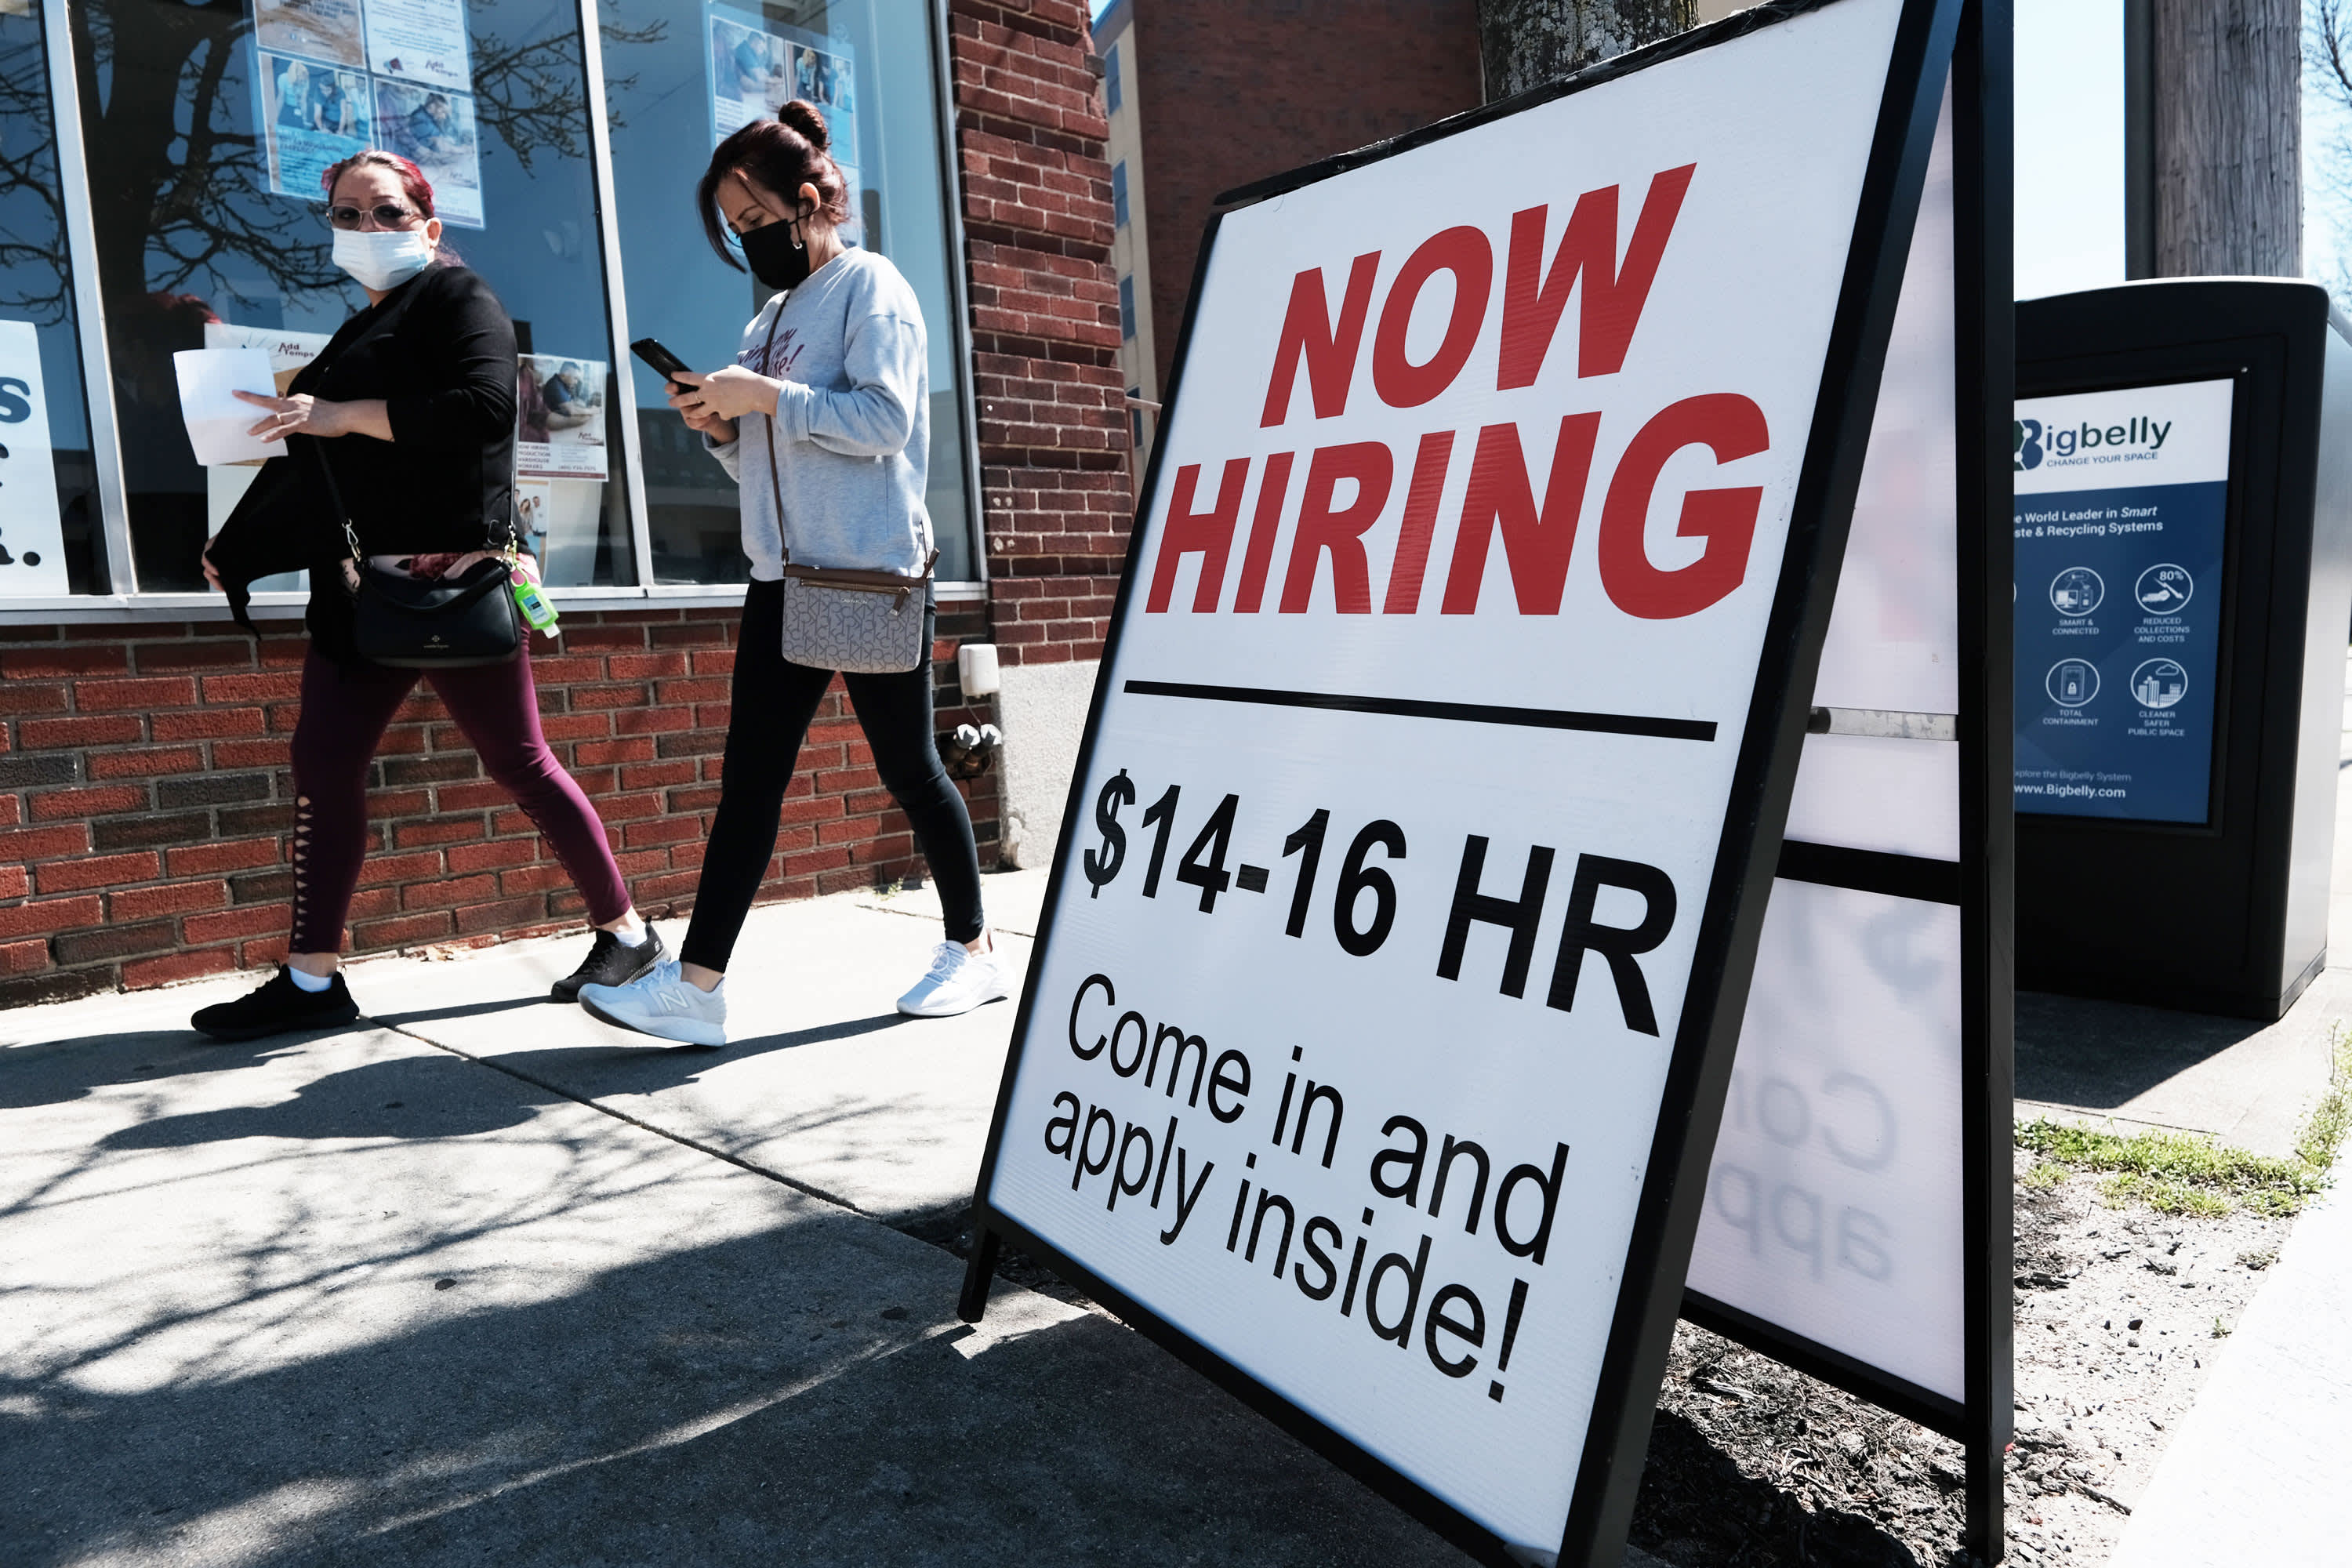 Unemployed demands fell again last week as the employment picture continued to improve